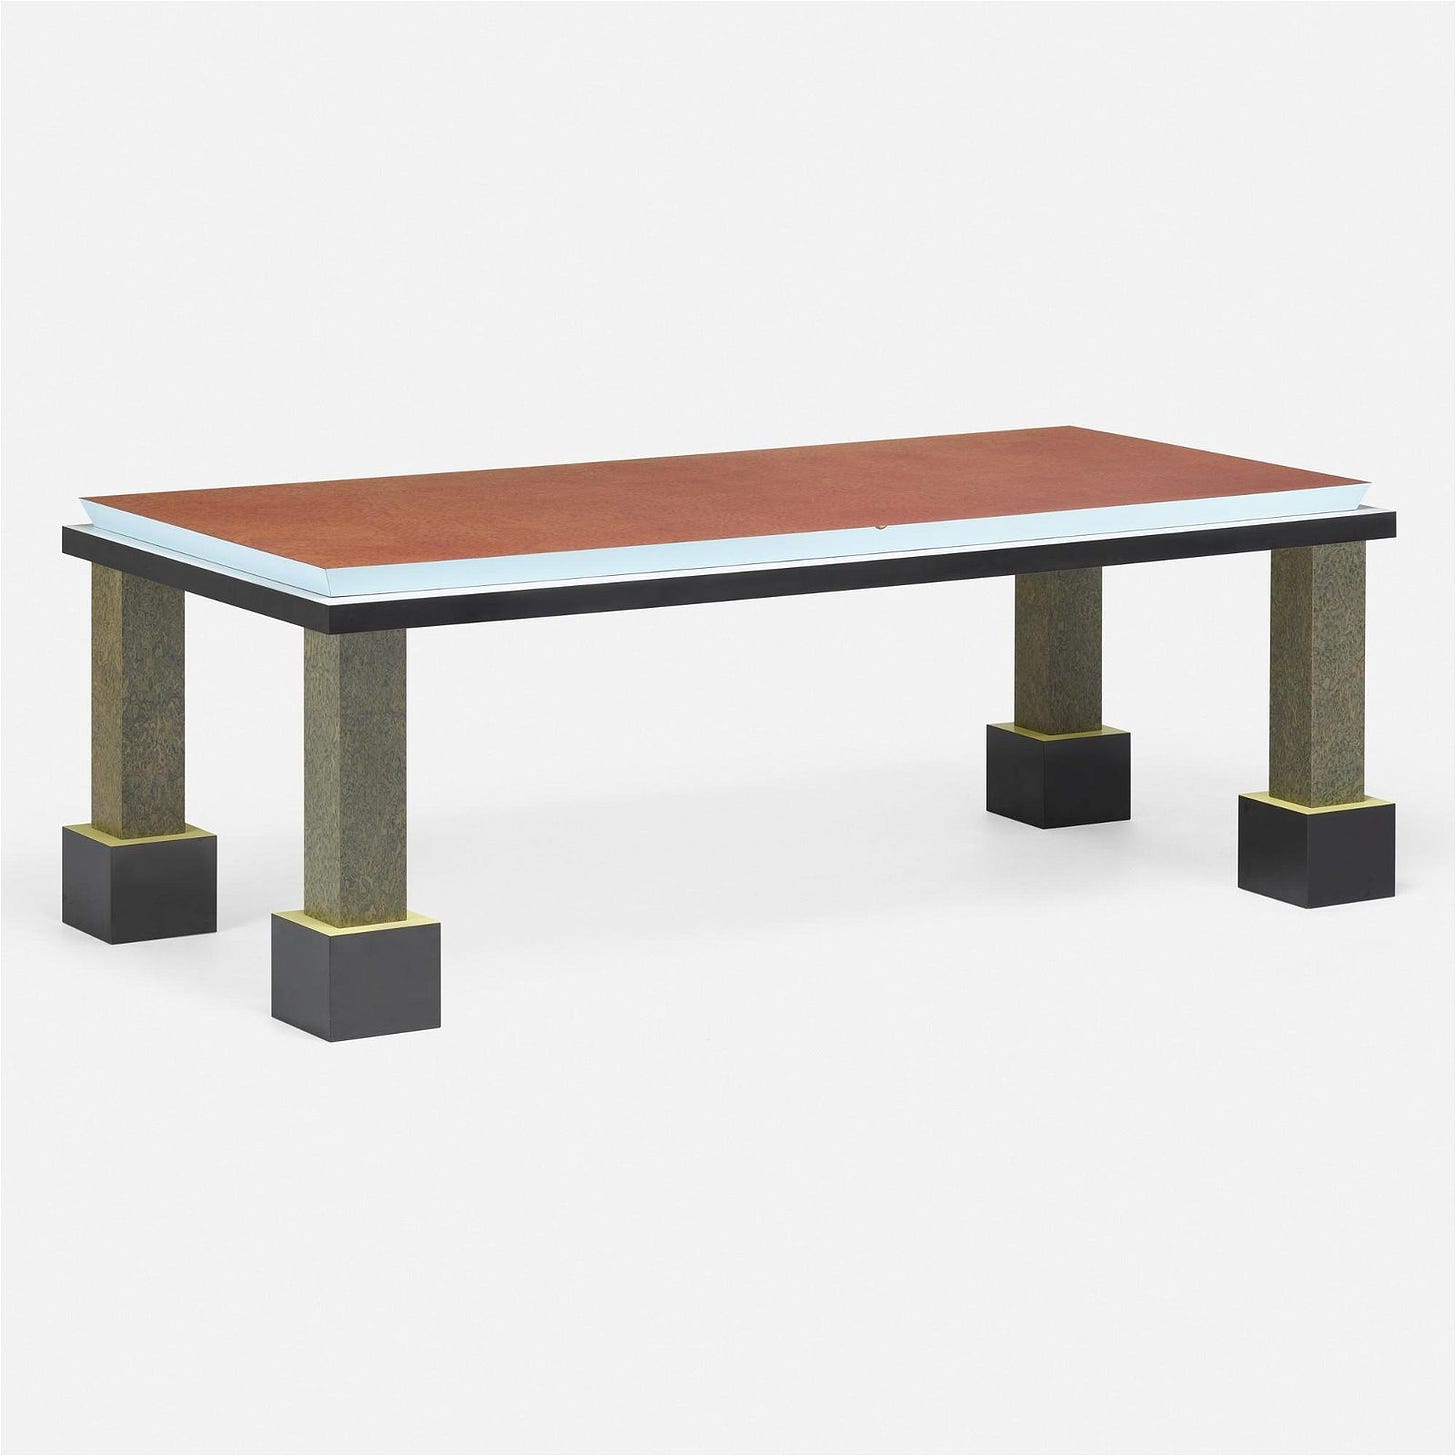 Ettore Sottsass, Palm Springs dining table